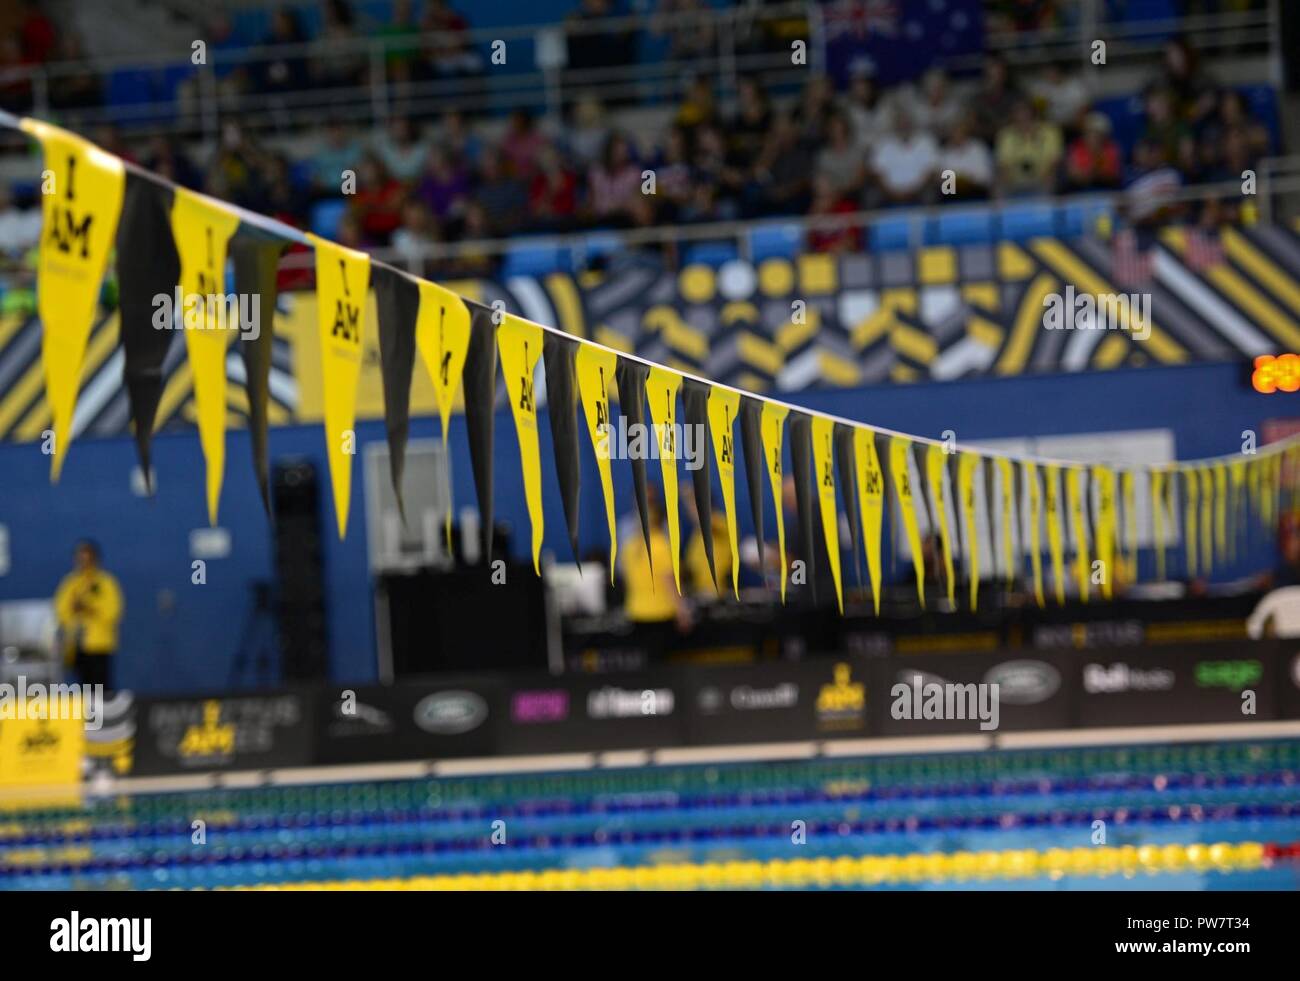 Athletes from 17 nations compete during swimming preliminaries at the 2017 Invictus Games in the Pan Am Sports Centre in Toronto, Canada, Sept. 28, 2017. The Invictus Games were established by Prince Harry of Wales in 2014, and have brought together more than 550 wounded and injured veterans to take part in 12 adaptive sporting events. Stock Photo